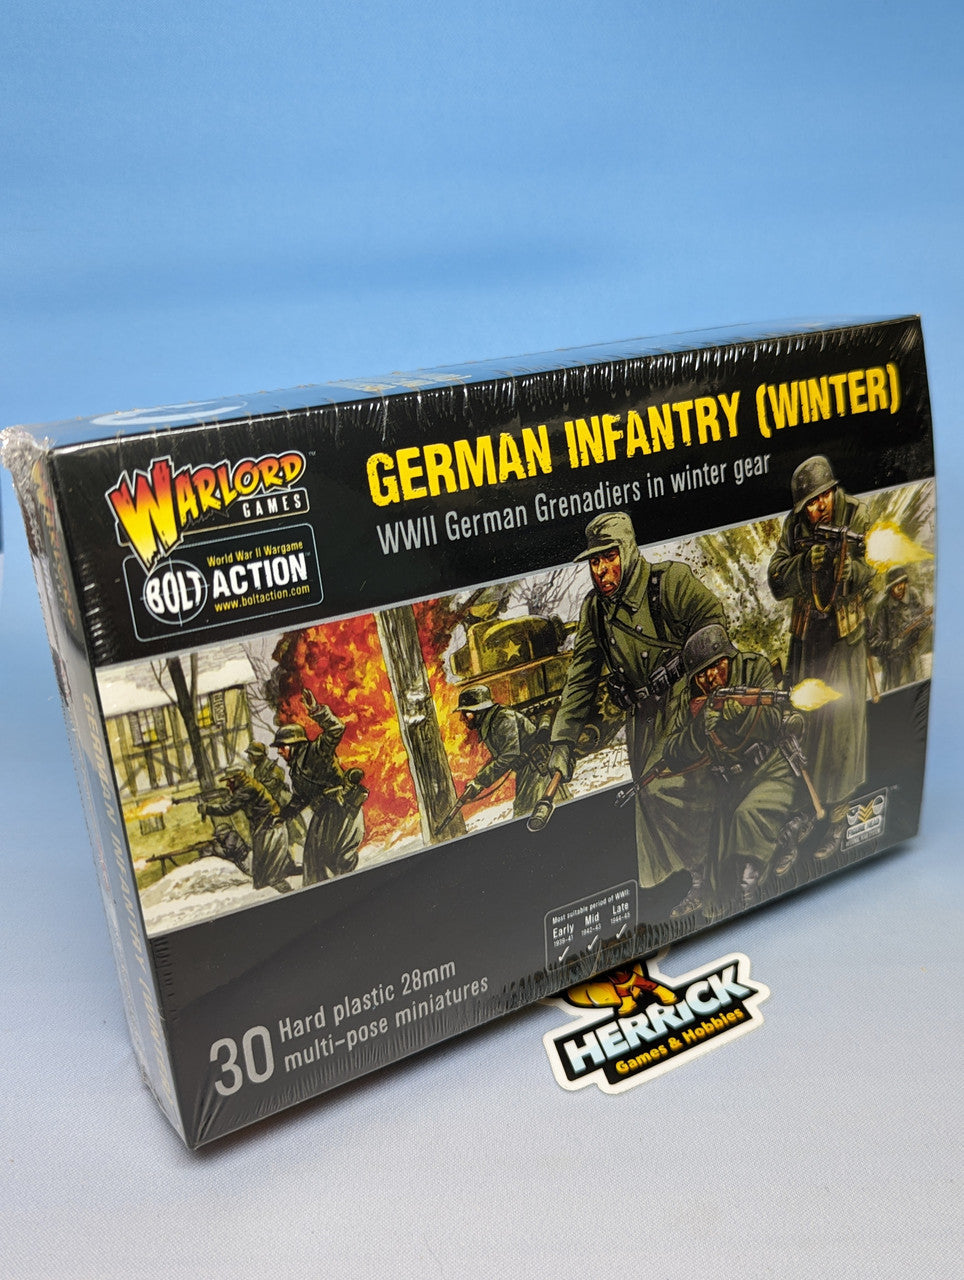 Preview: Early war Waffen-SS - Warlord Games